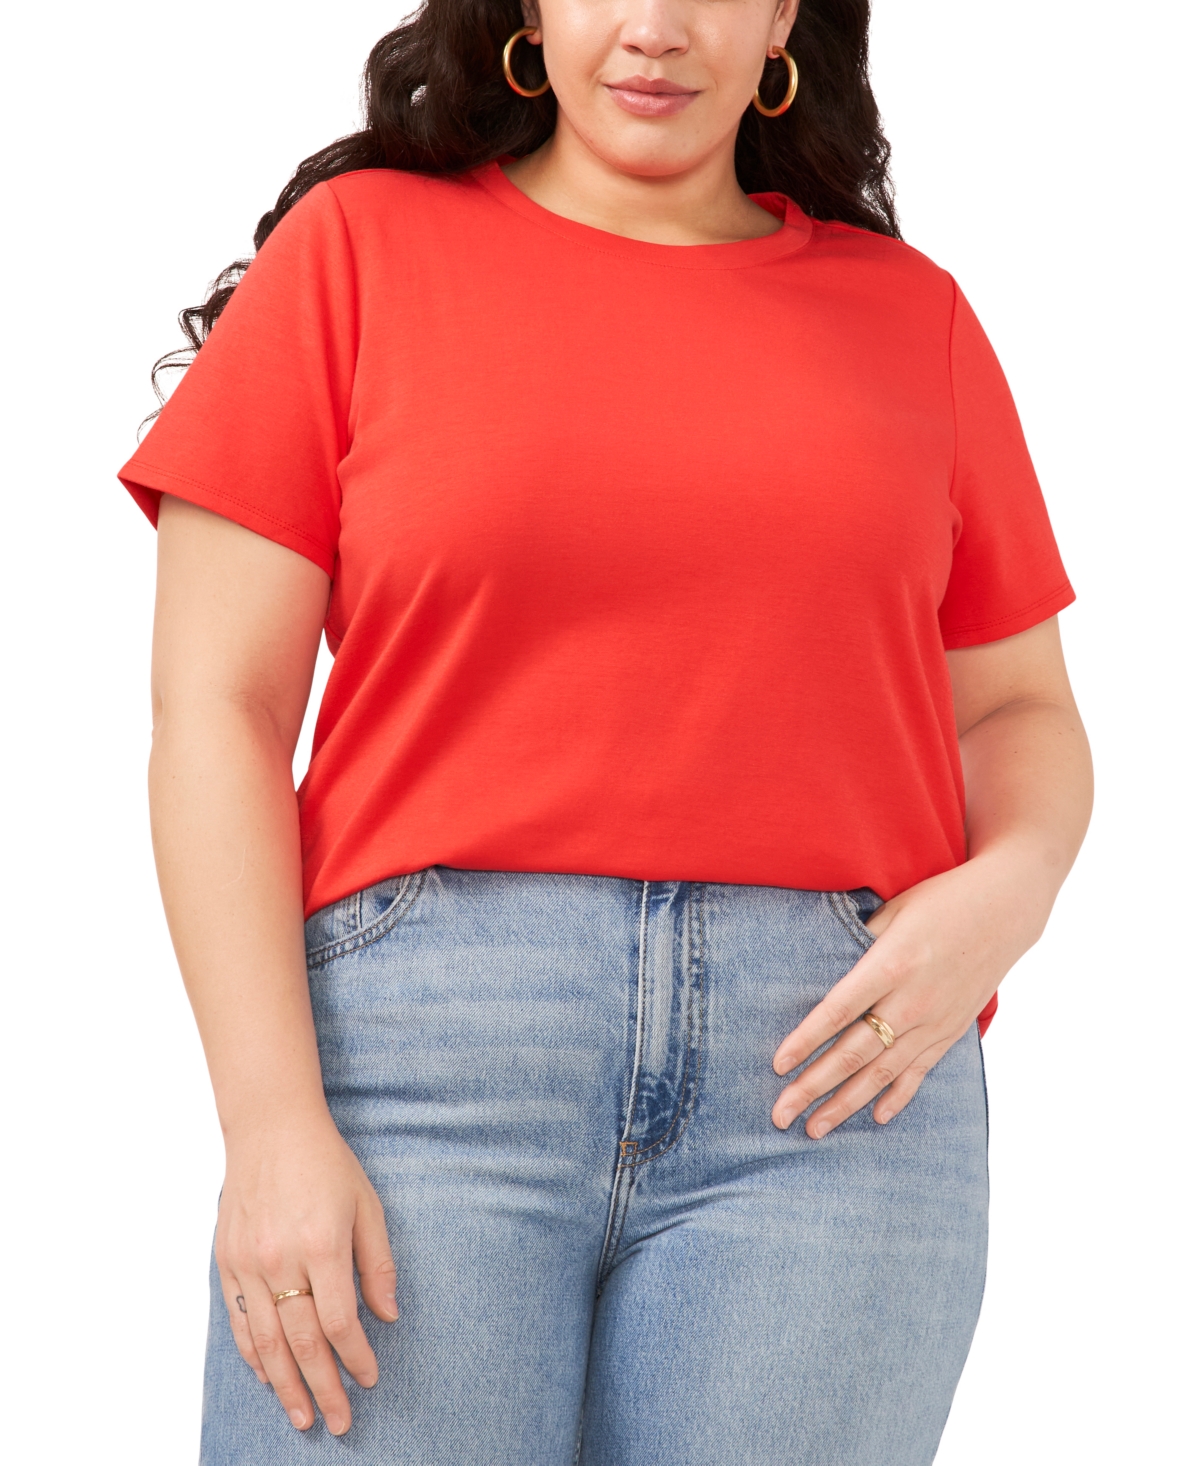 Plus Size Crewneck Polished Short-Sleeve Knit Top - Tulip Red